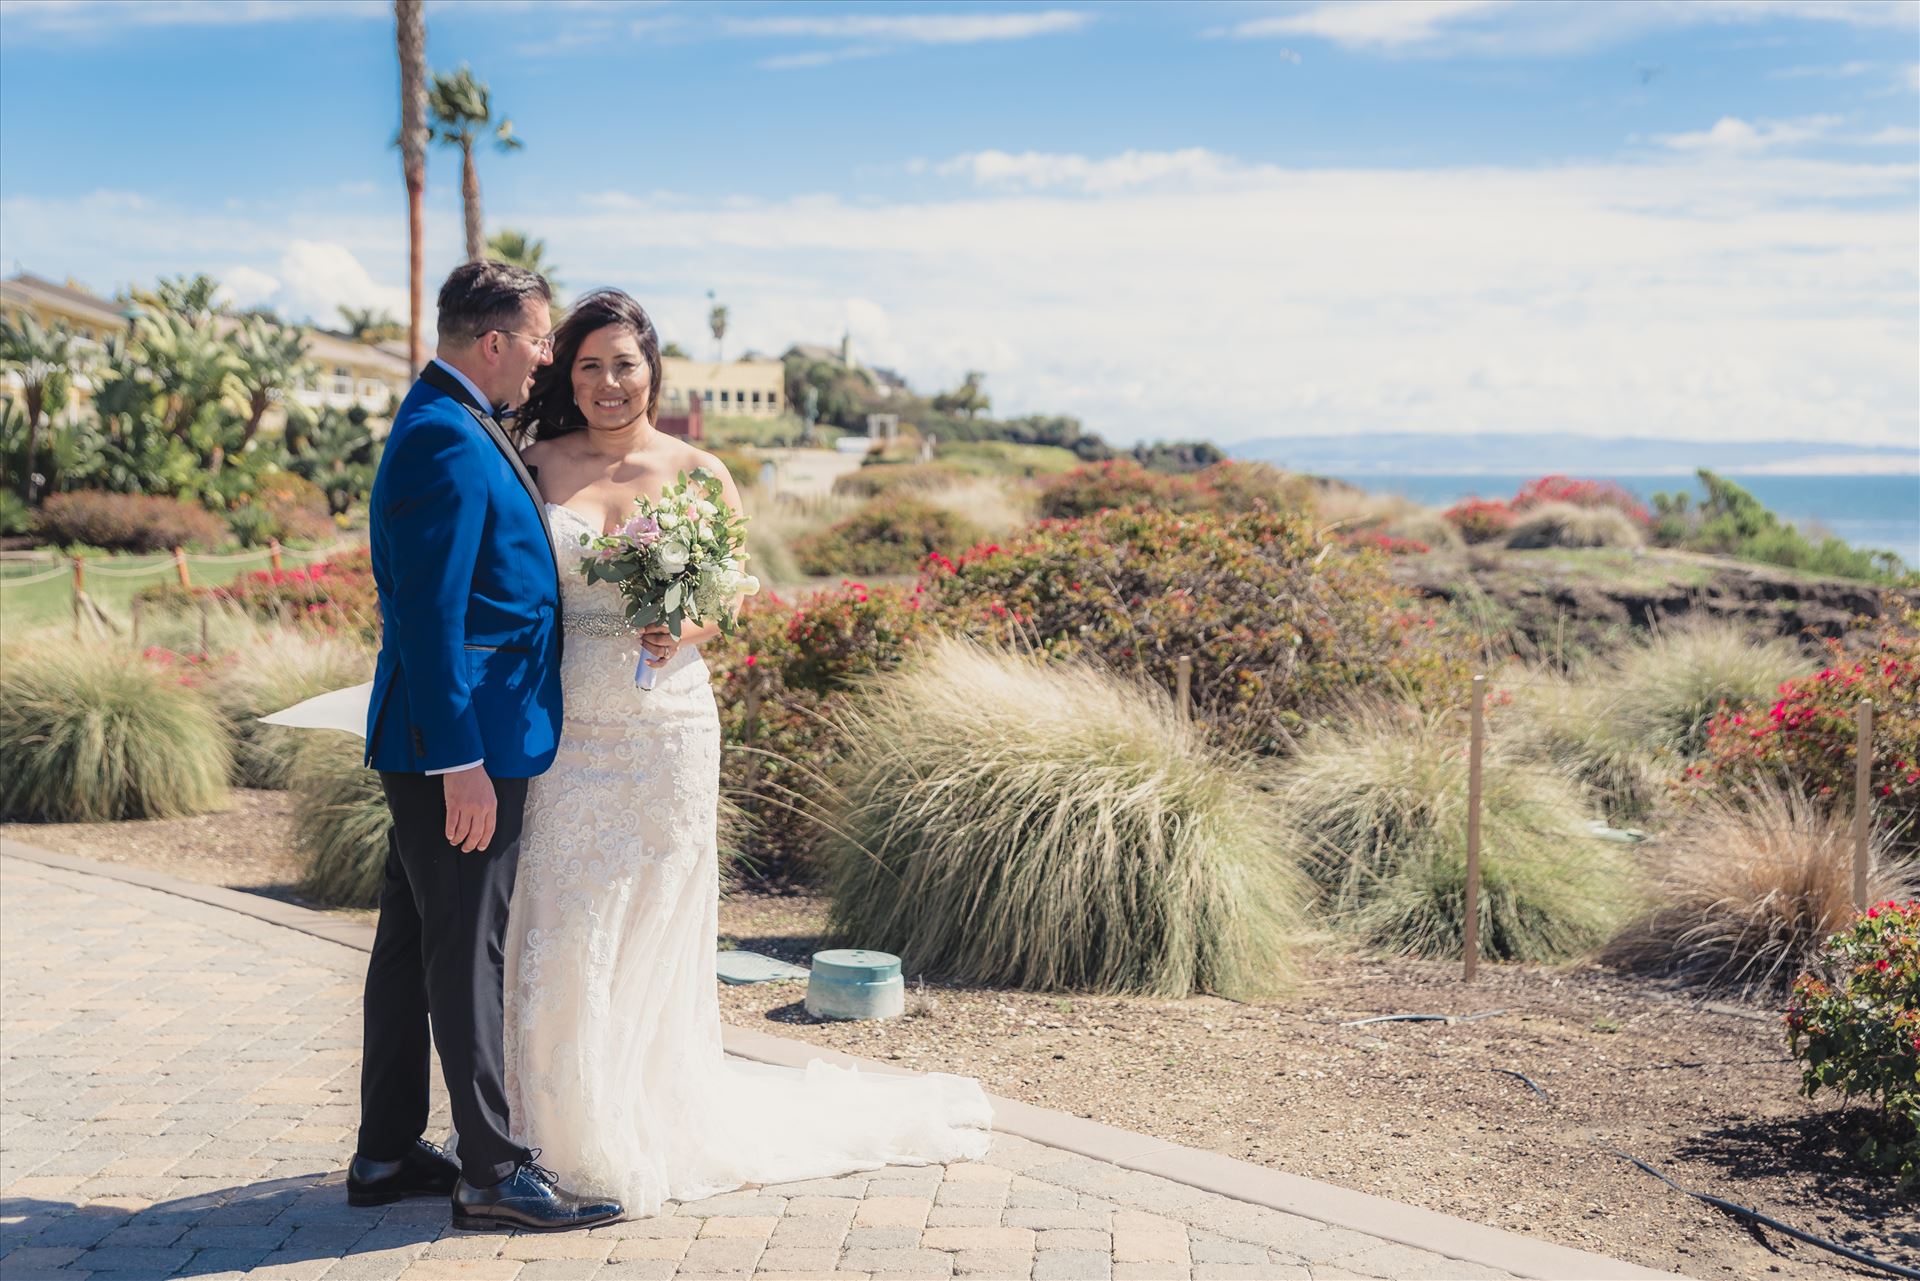 Candy and Christopher 22 - Wedding at Dolphin Bay Resort and Spa in Shell Beach, California by Sarah Williams of Mirror's Edge Photography, a San Luis Obispo County Wedding Photographer. Bride and Groom overlooking Pismo Beach by Sarah Williams